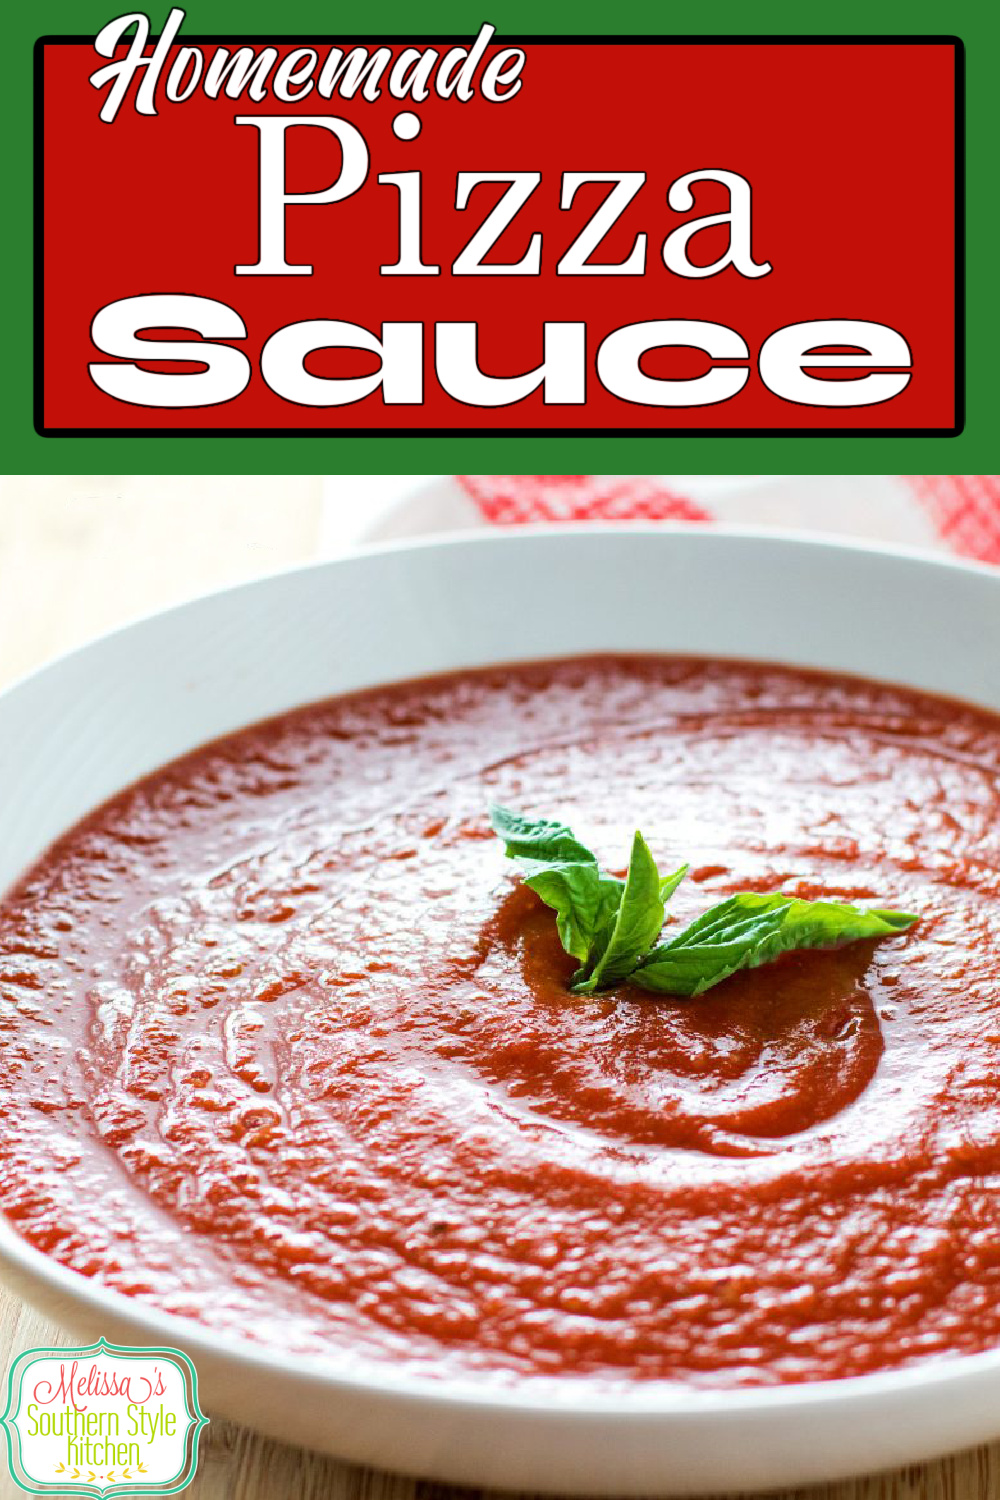 This pizza sauce takes 5 minutes to make! #pizzasauce #homemadepizzasauce #tomatosauce #pizzas #pizzarecipes #dinner #dinnerideas #food #recipes #southernfood #italian #italianinspired #southernrecipes via @melissasssk